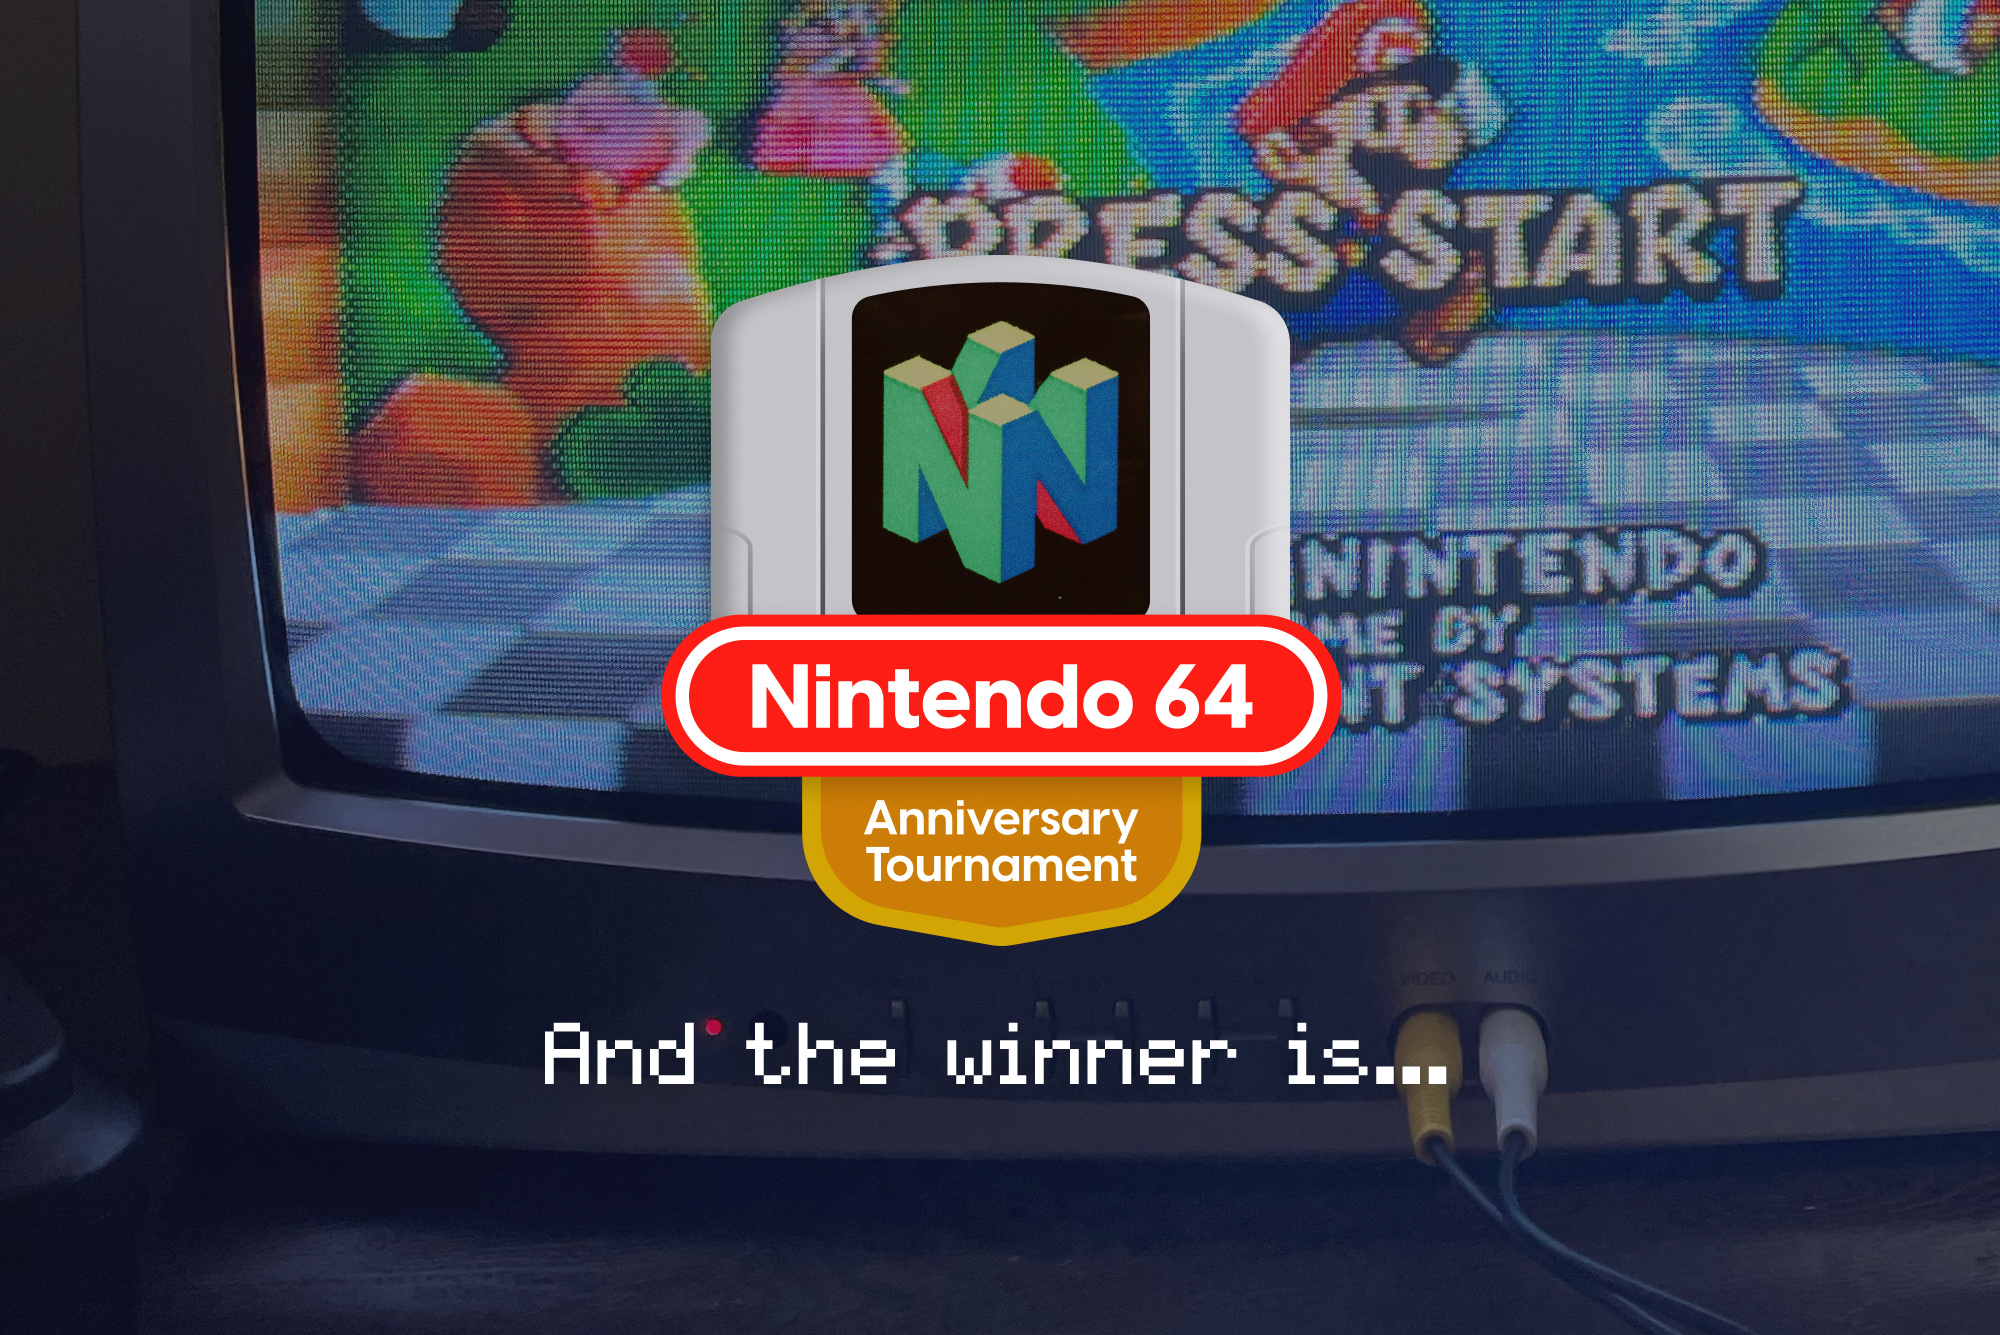 N64 tournament Winner badge with text that reads "And the winner is..."